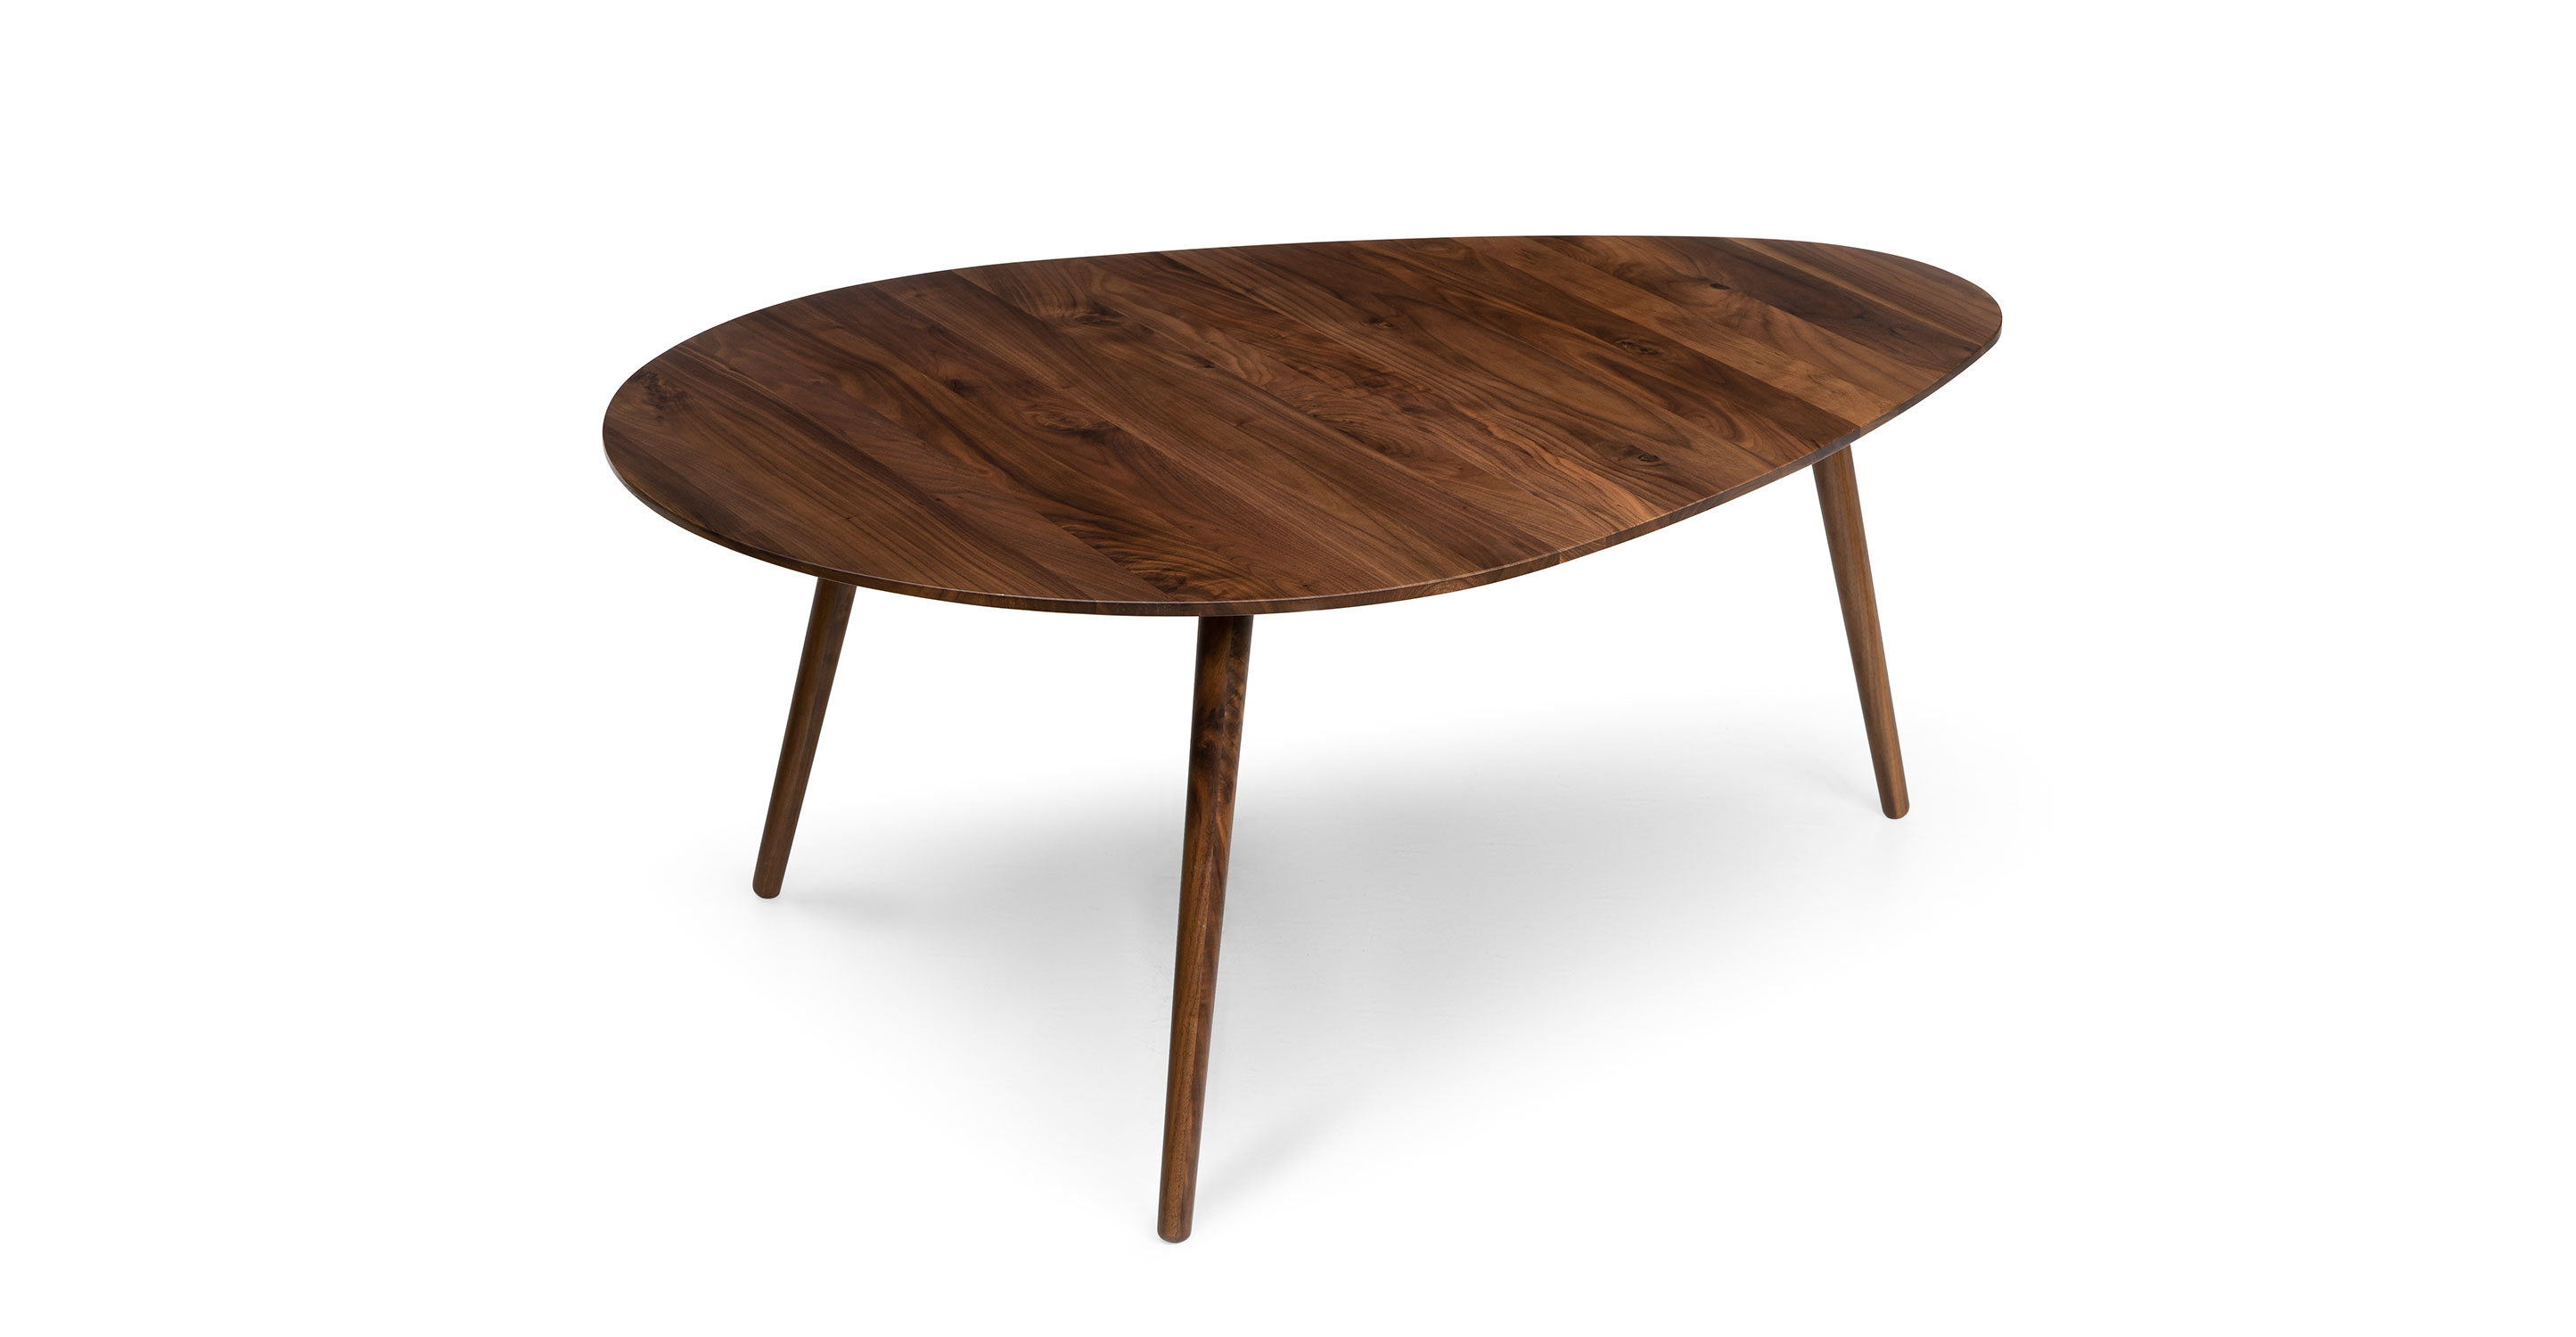 Contagious Clerk a billion Contemporary, Mid Century & Modern Coffee Tables | Article